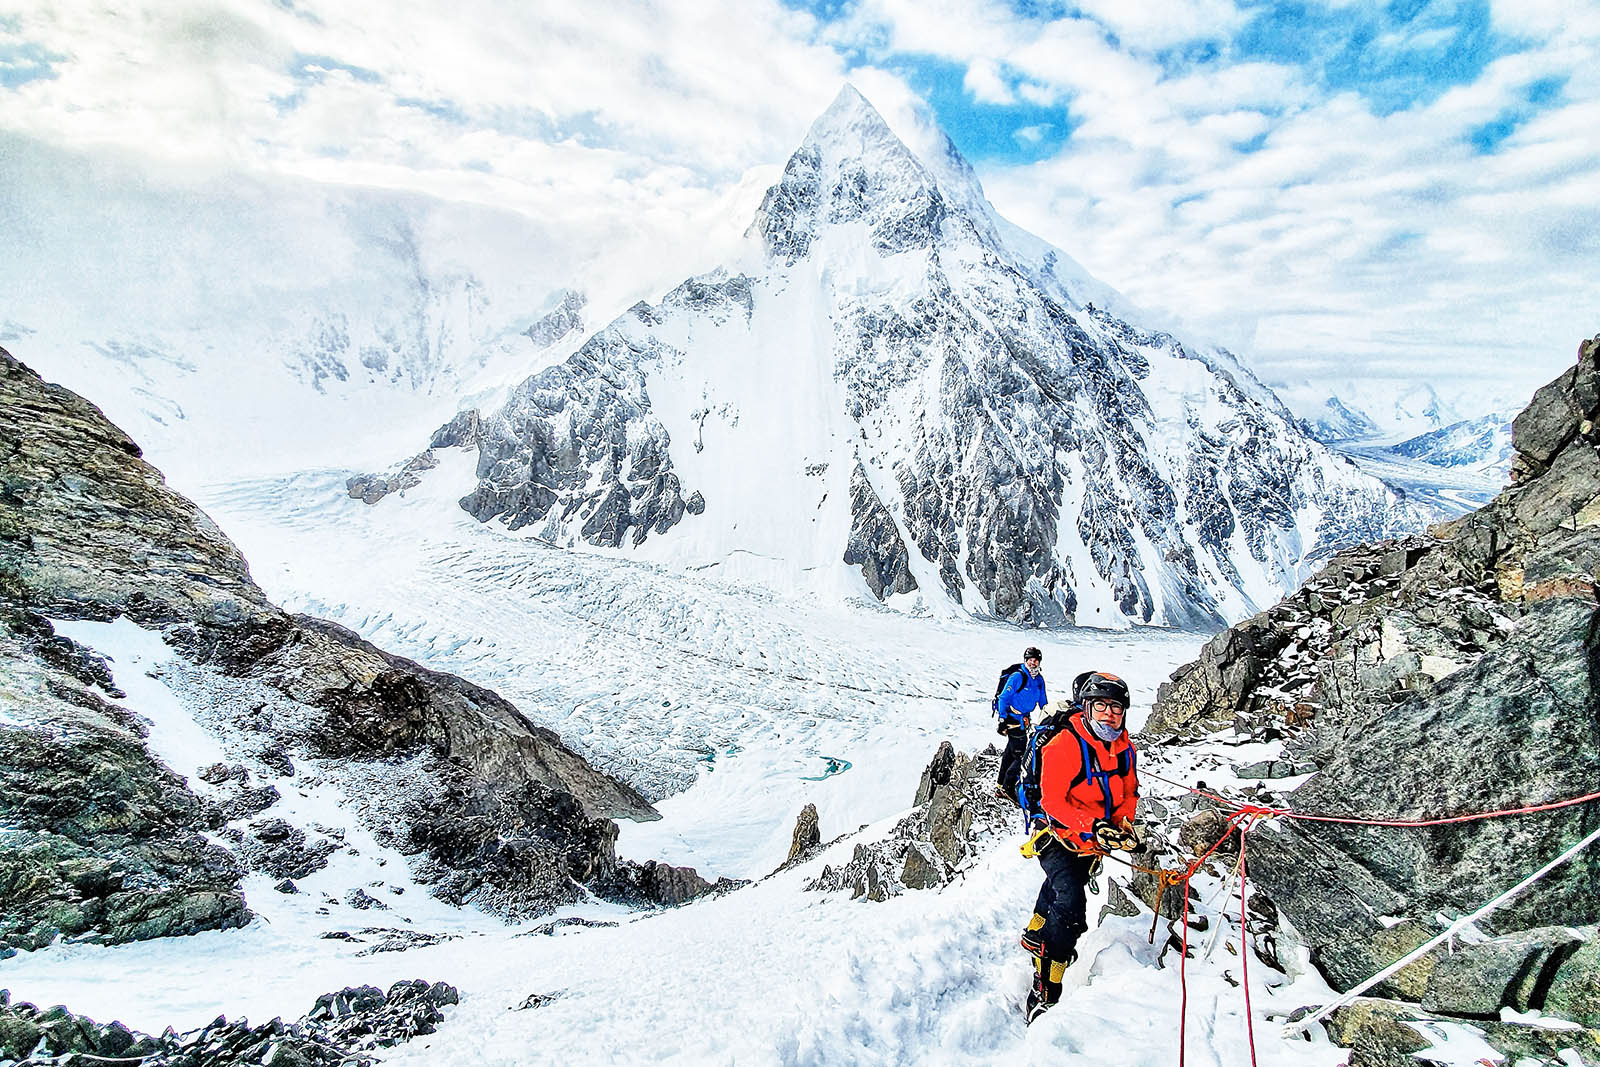 All Answers to This Trivia Quiz Are Numbers – Can You Get at Least 15/20? K2 Mountain